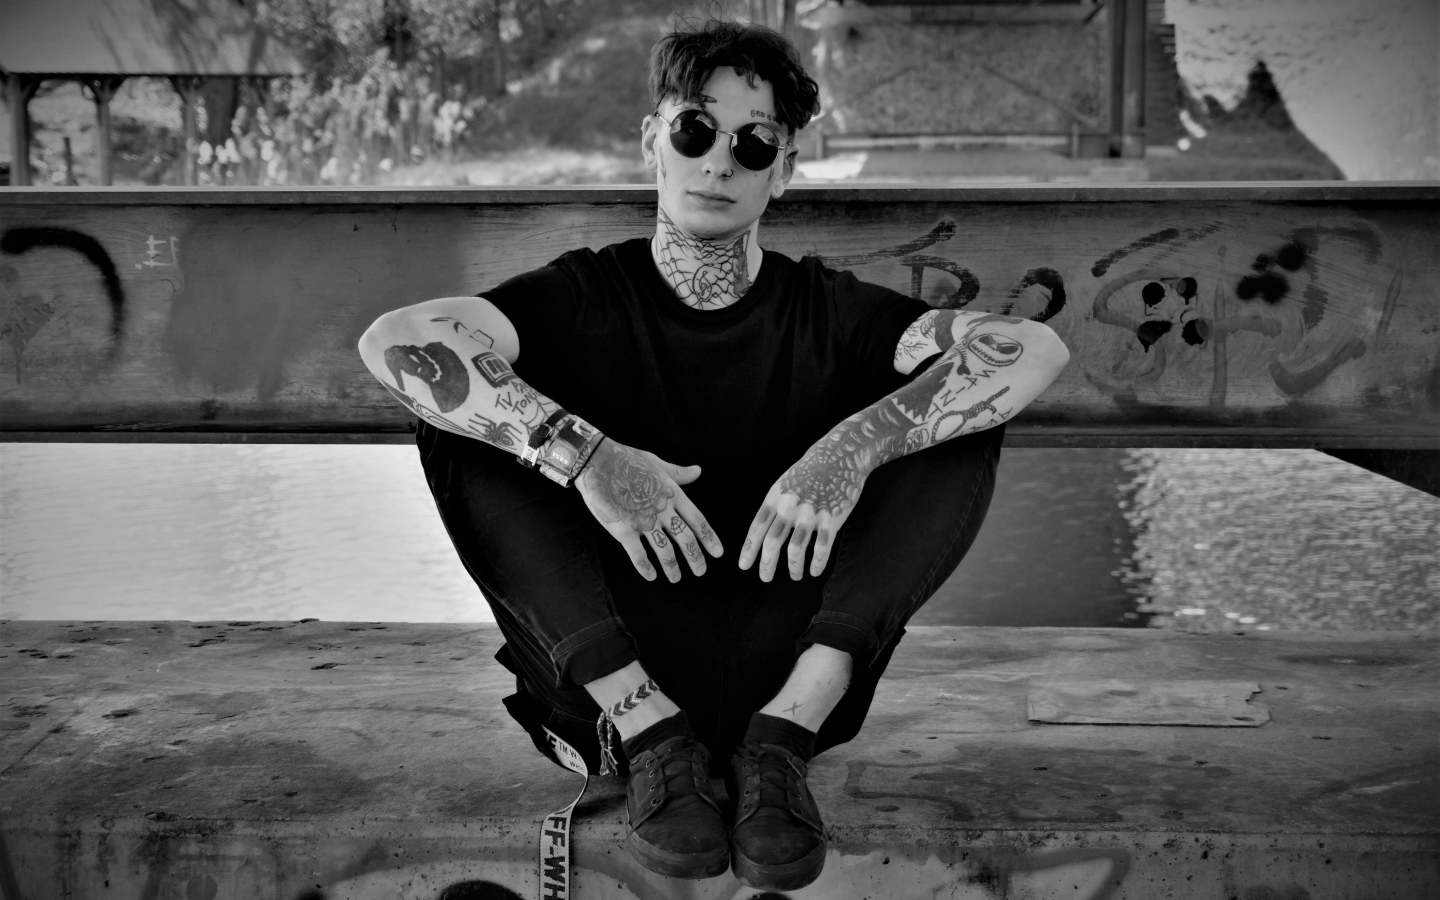 A man in black glasses with tattoos on his body.